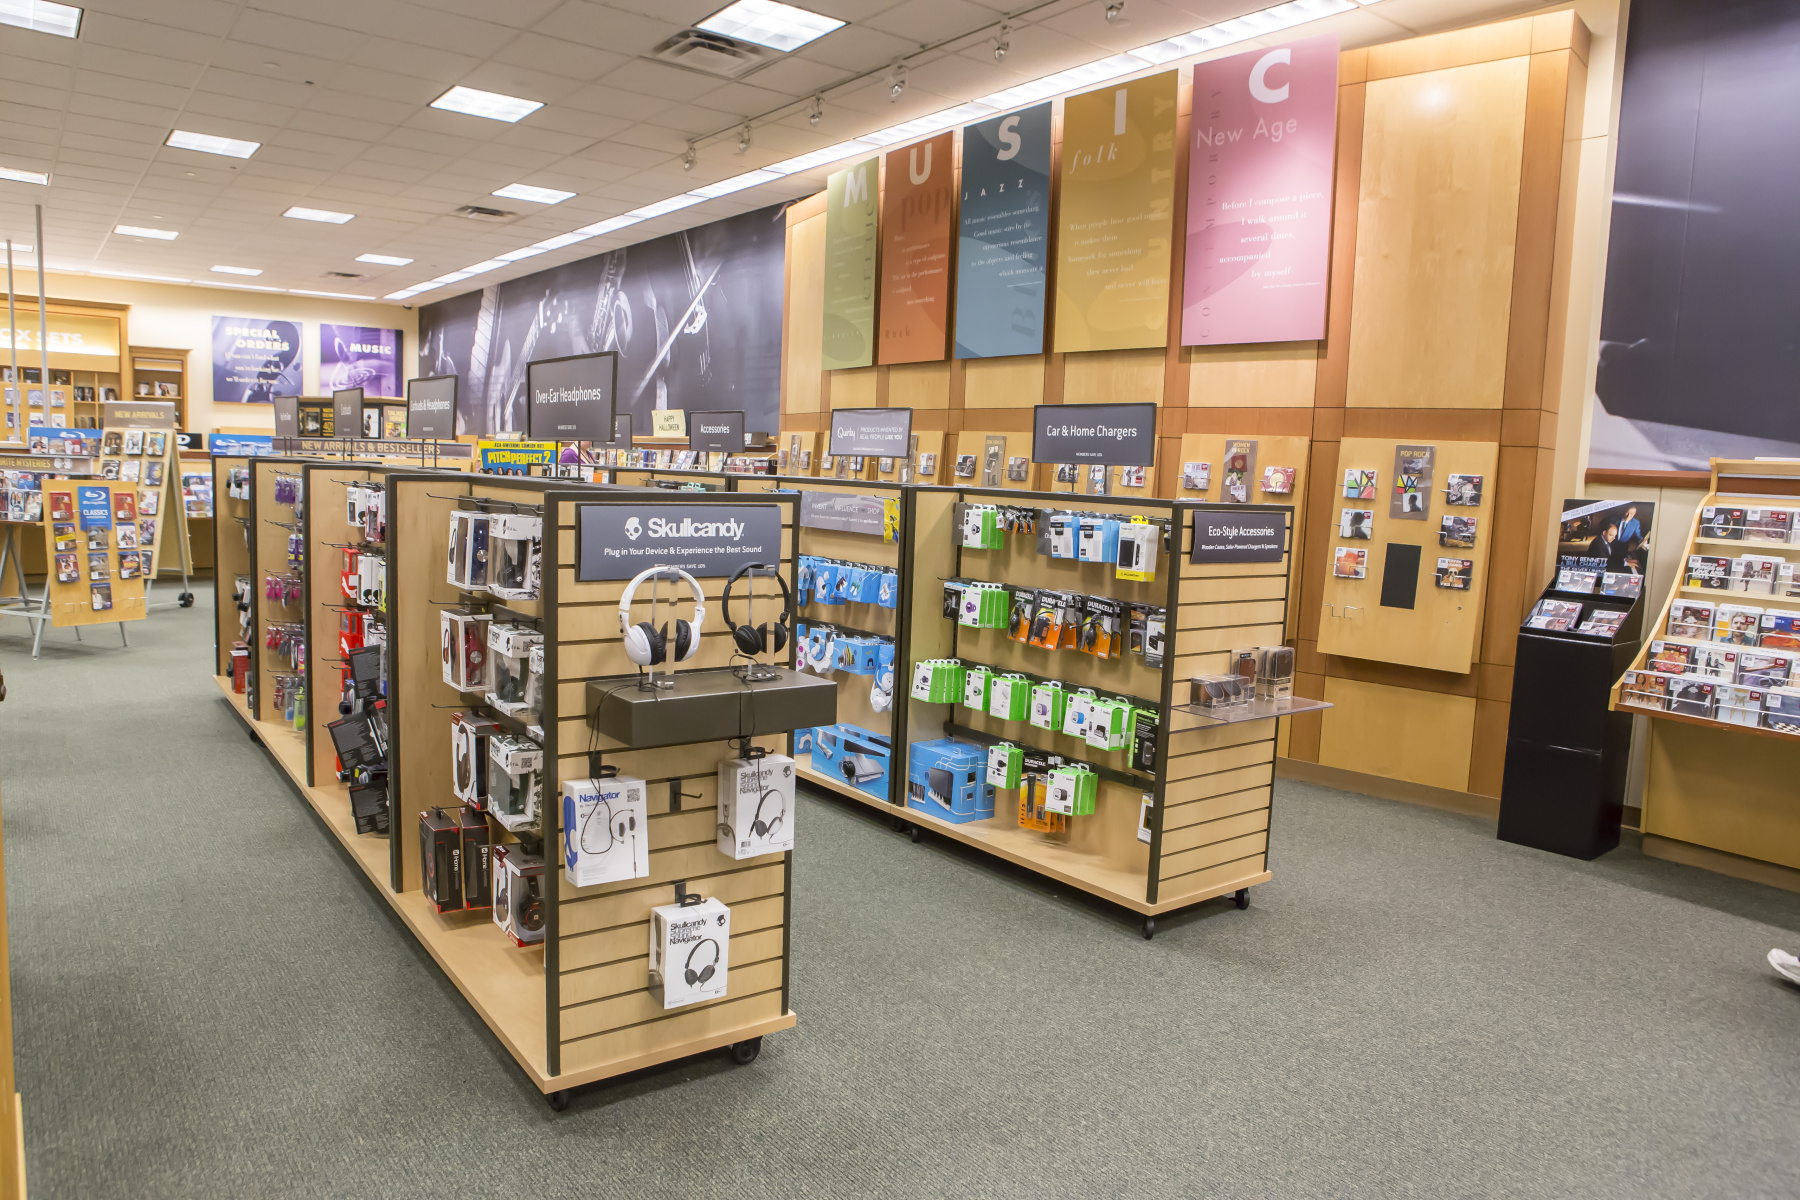 Nationwide Fixture Installations Inc Barnes & Noble Case Study New Store Installation Millwork Packages Retail Rollouts Program Management Signage Maintenance